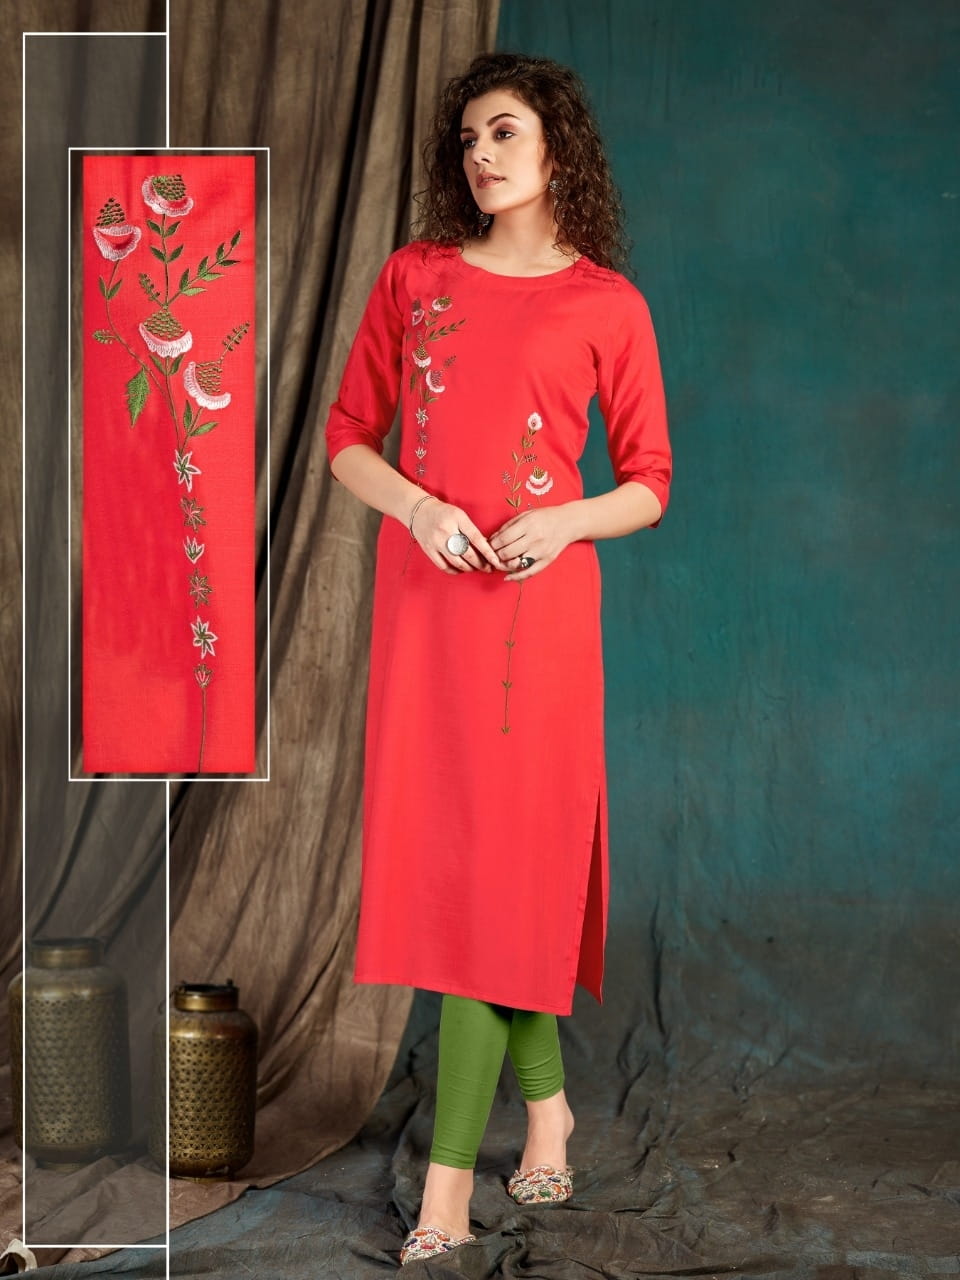 Mind-blowing Light Red Color Designer Slub Rayon Embroidered Work Kurti For Function Wear